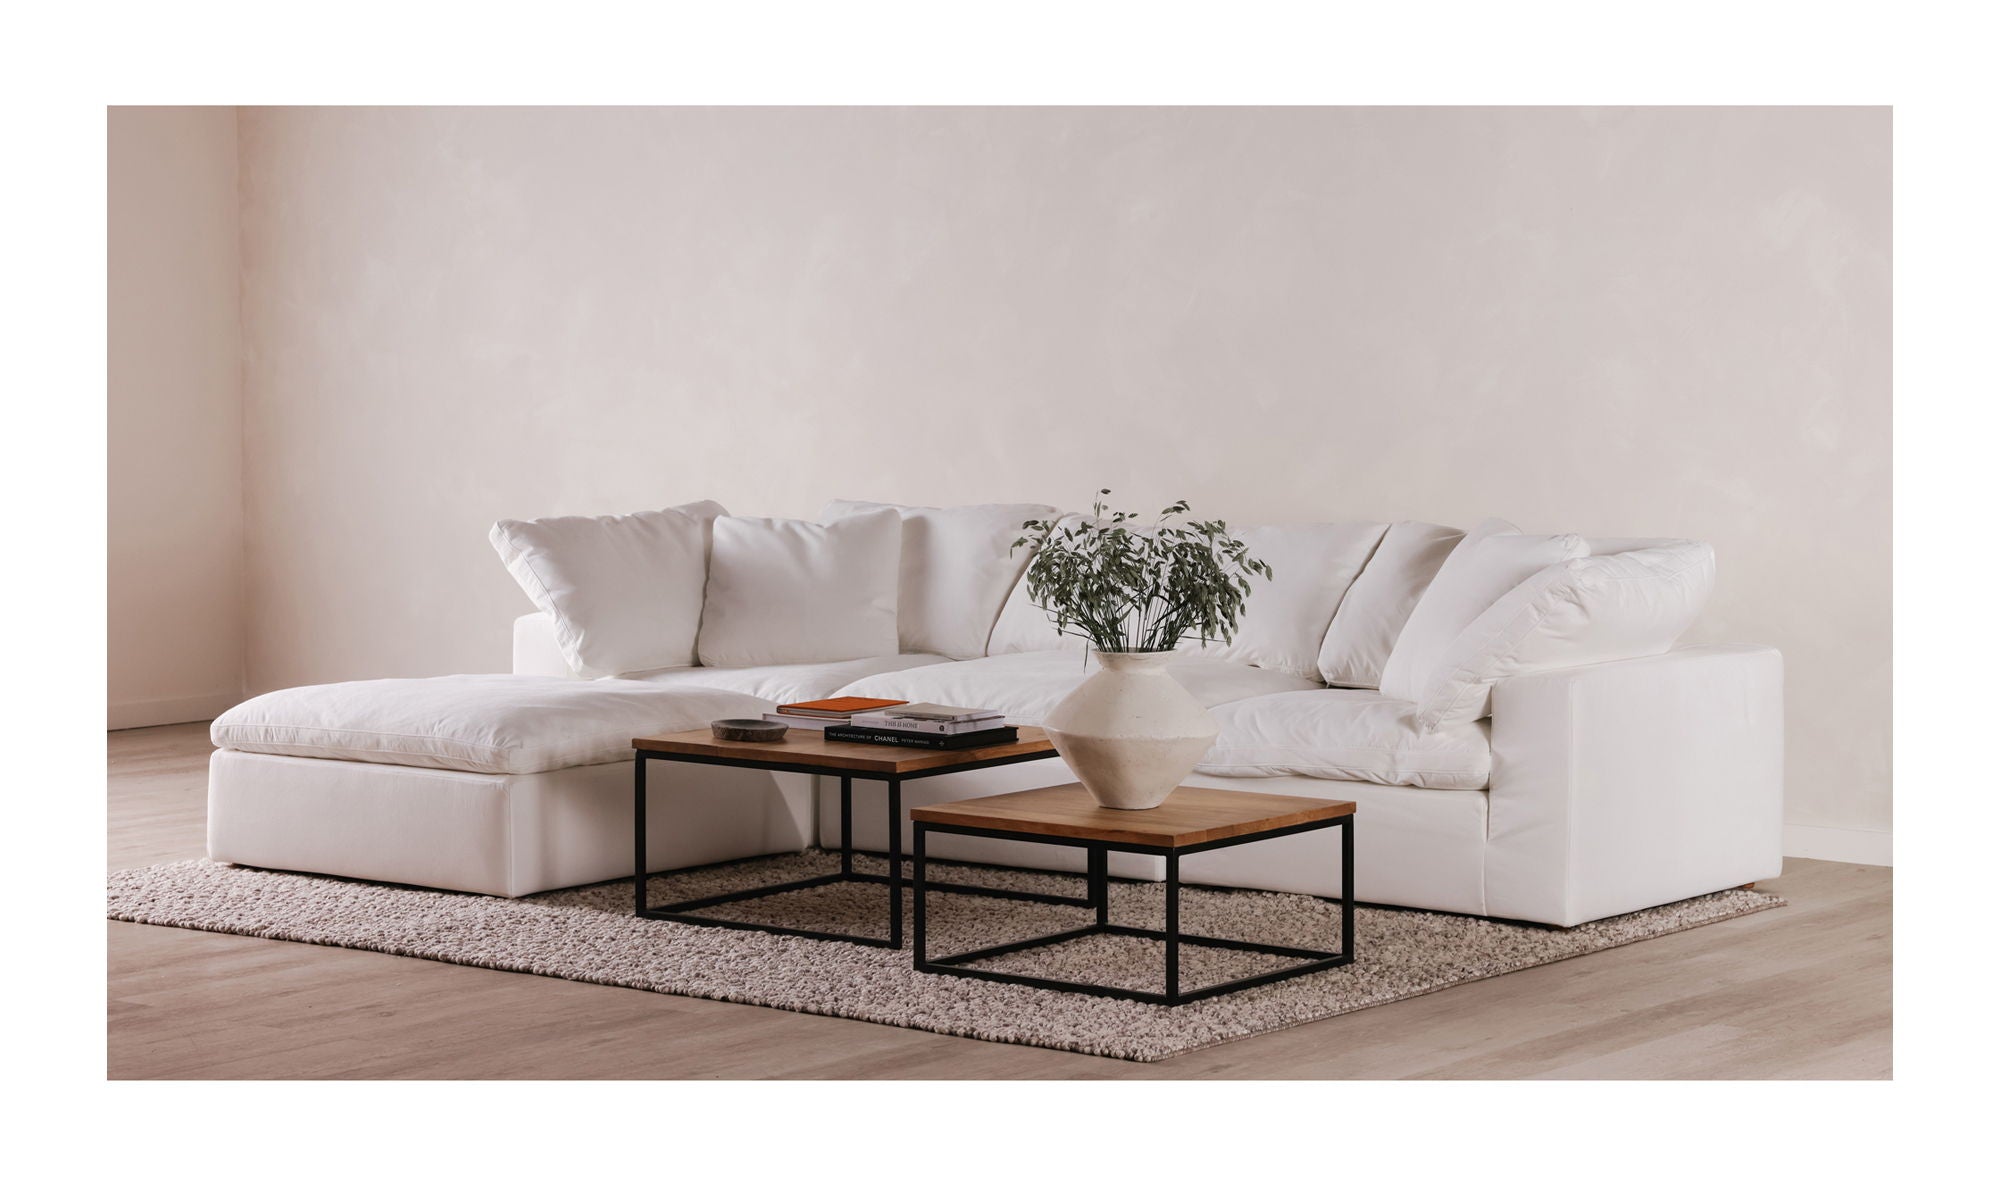 Clay Lounge Modular Sectional - LiveSmart Fabric - Cream White - Comfortable and Stylish Living Room Furniture